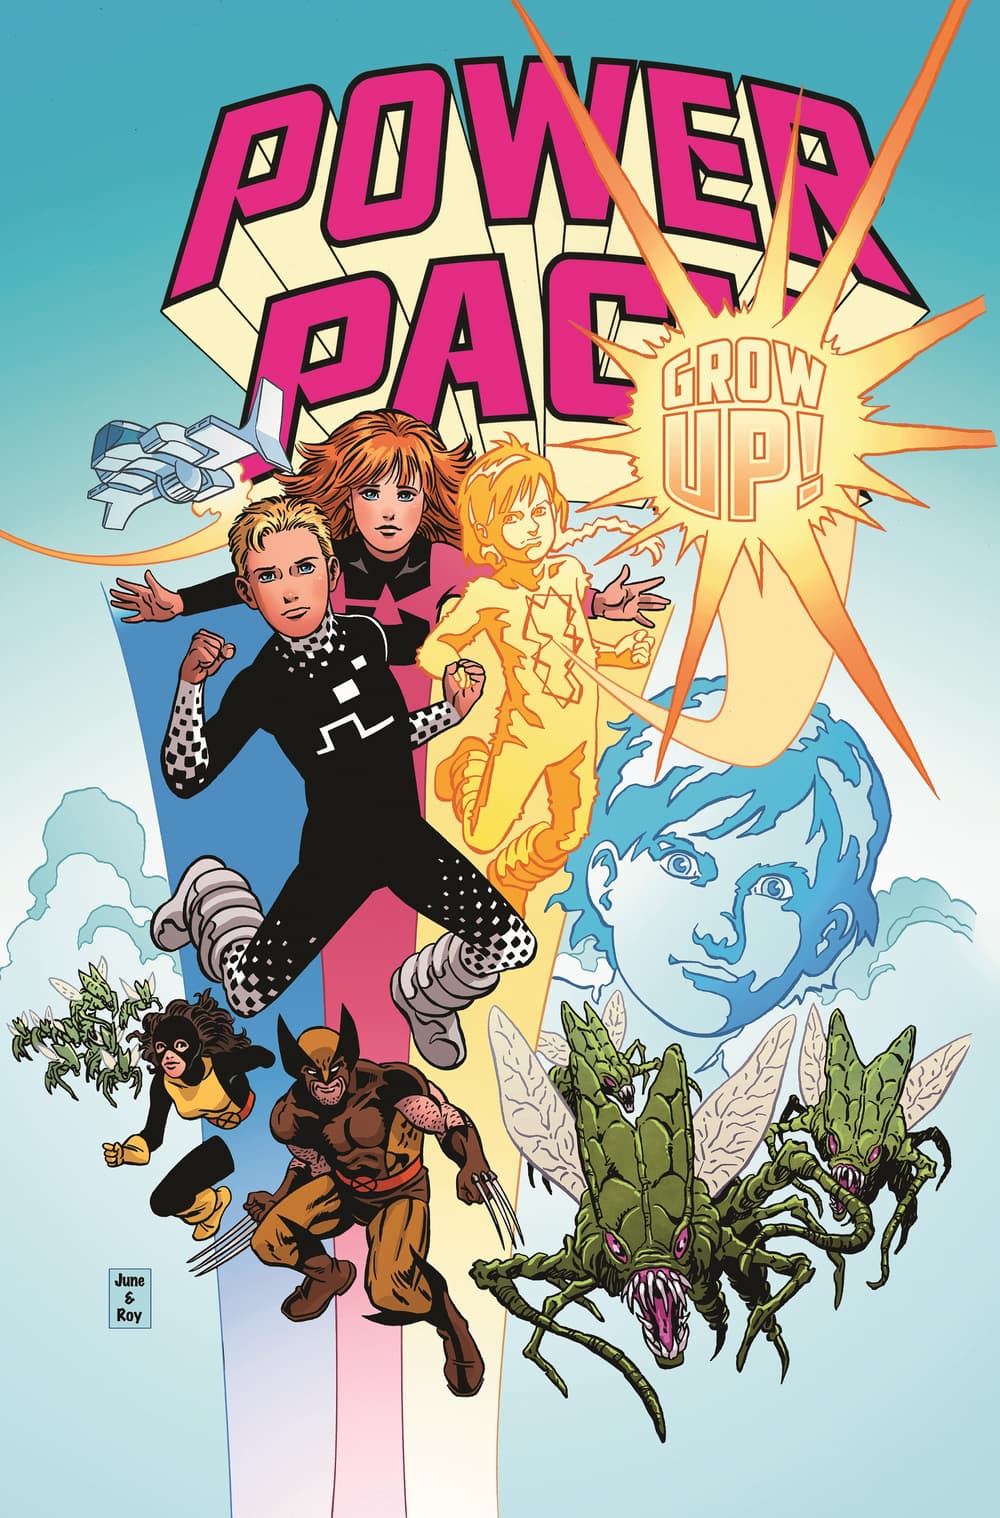 POWER PACK: GROW UP! #1 cover by June Brigman and Roy Richardson